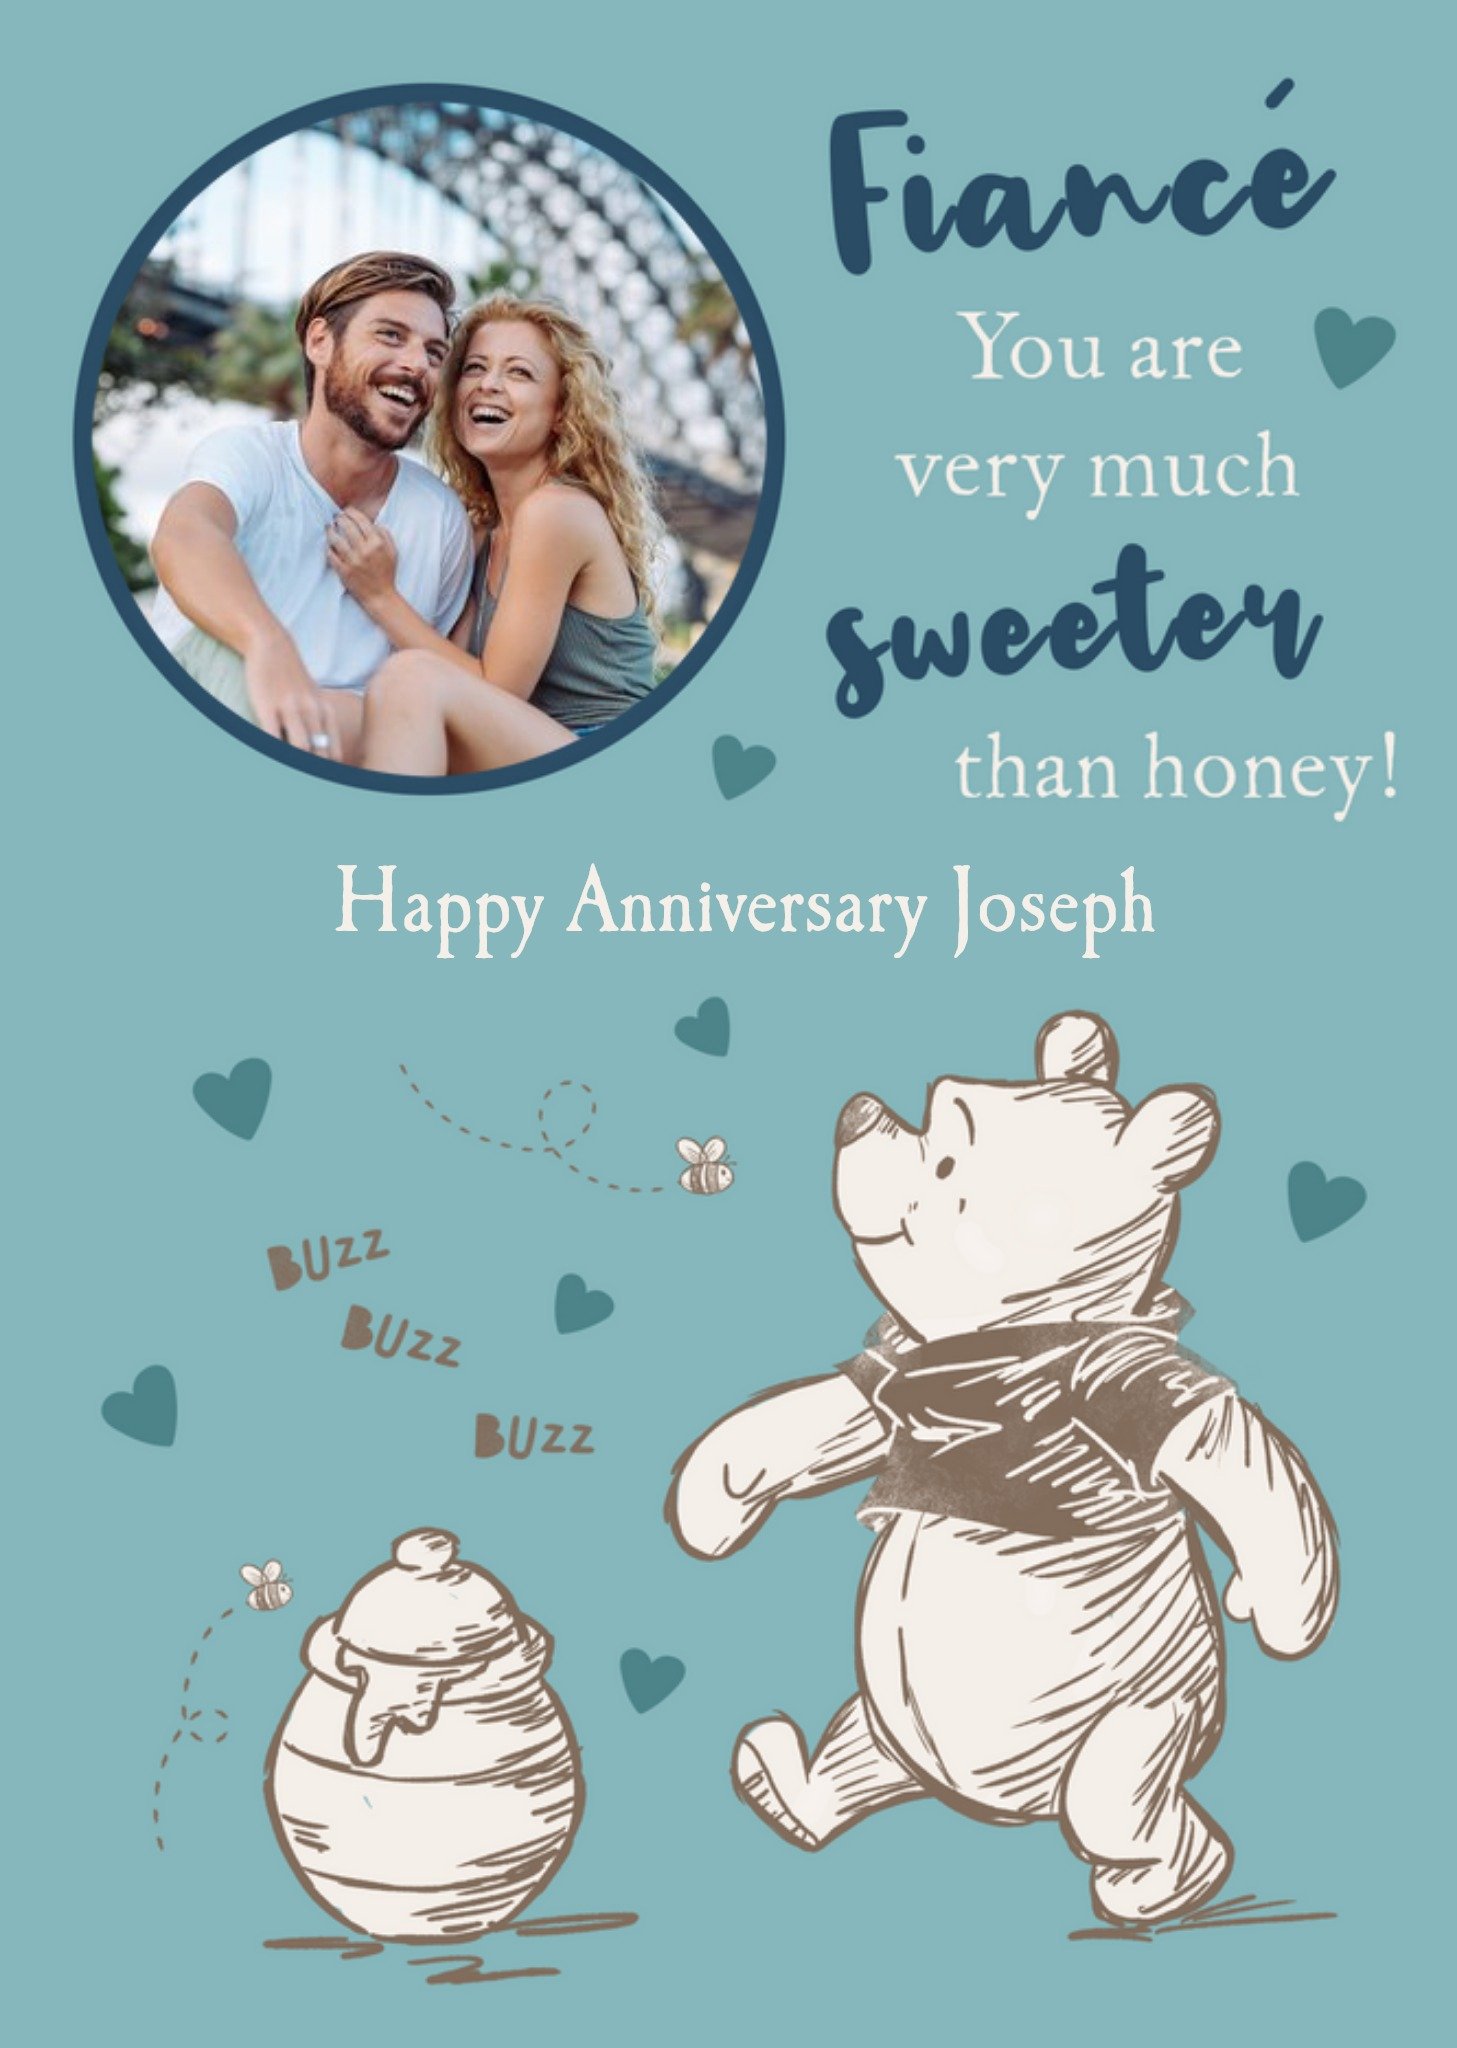 Winnie The Pooh Fiance Sweeter Than Honey Photo Upload Anniversary Card, Large